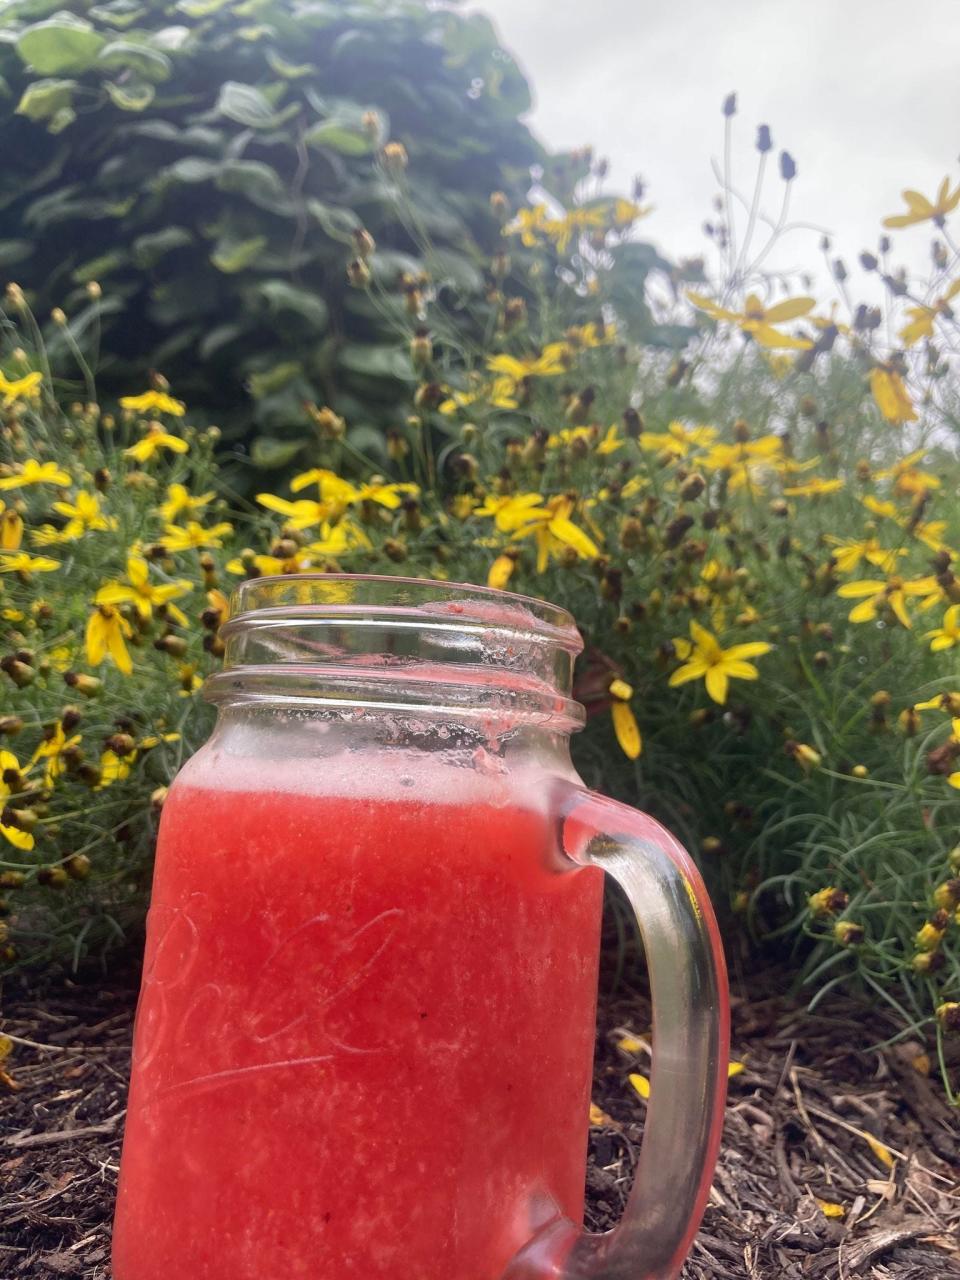 This refreshing summer slushie is a Yoder family favorite.